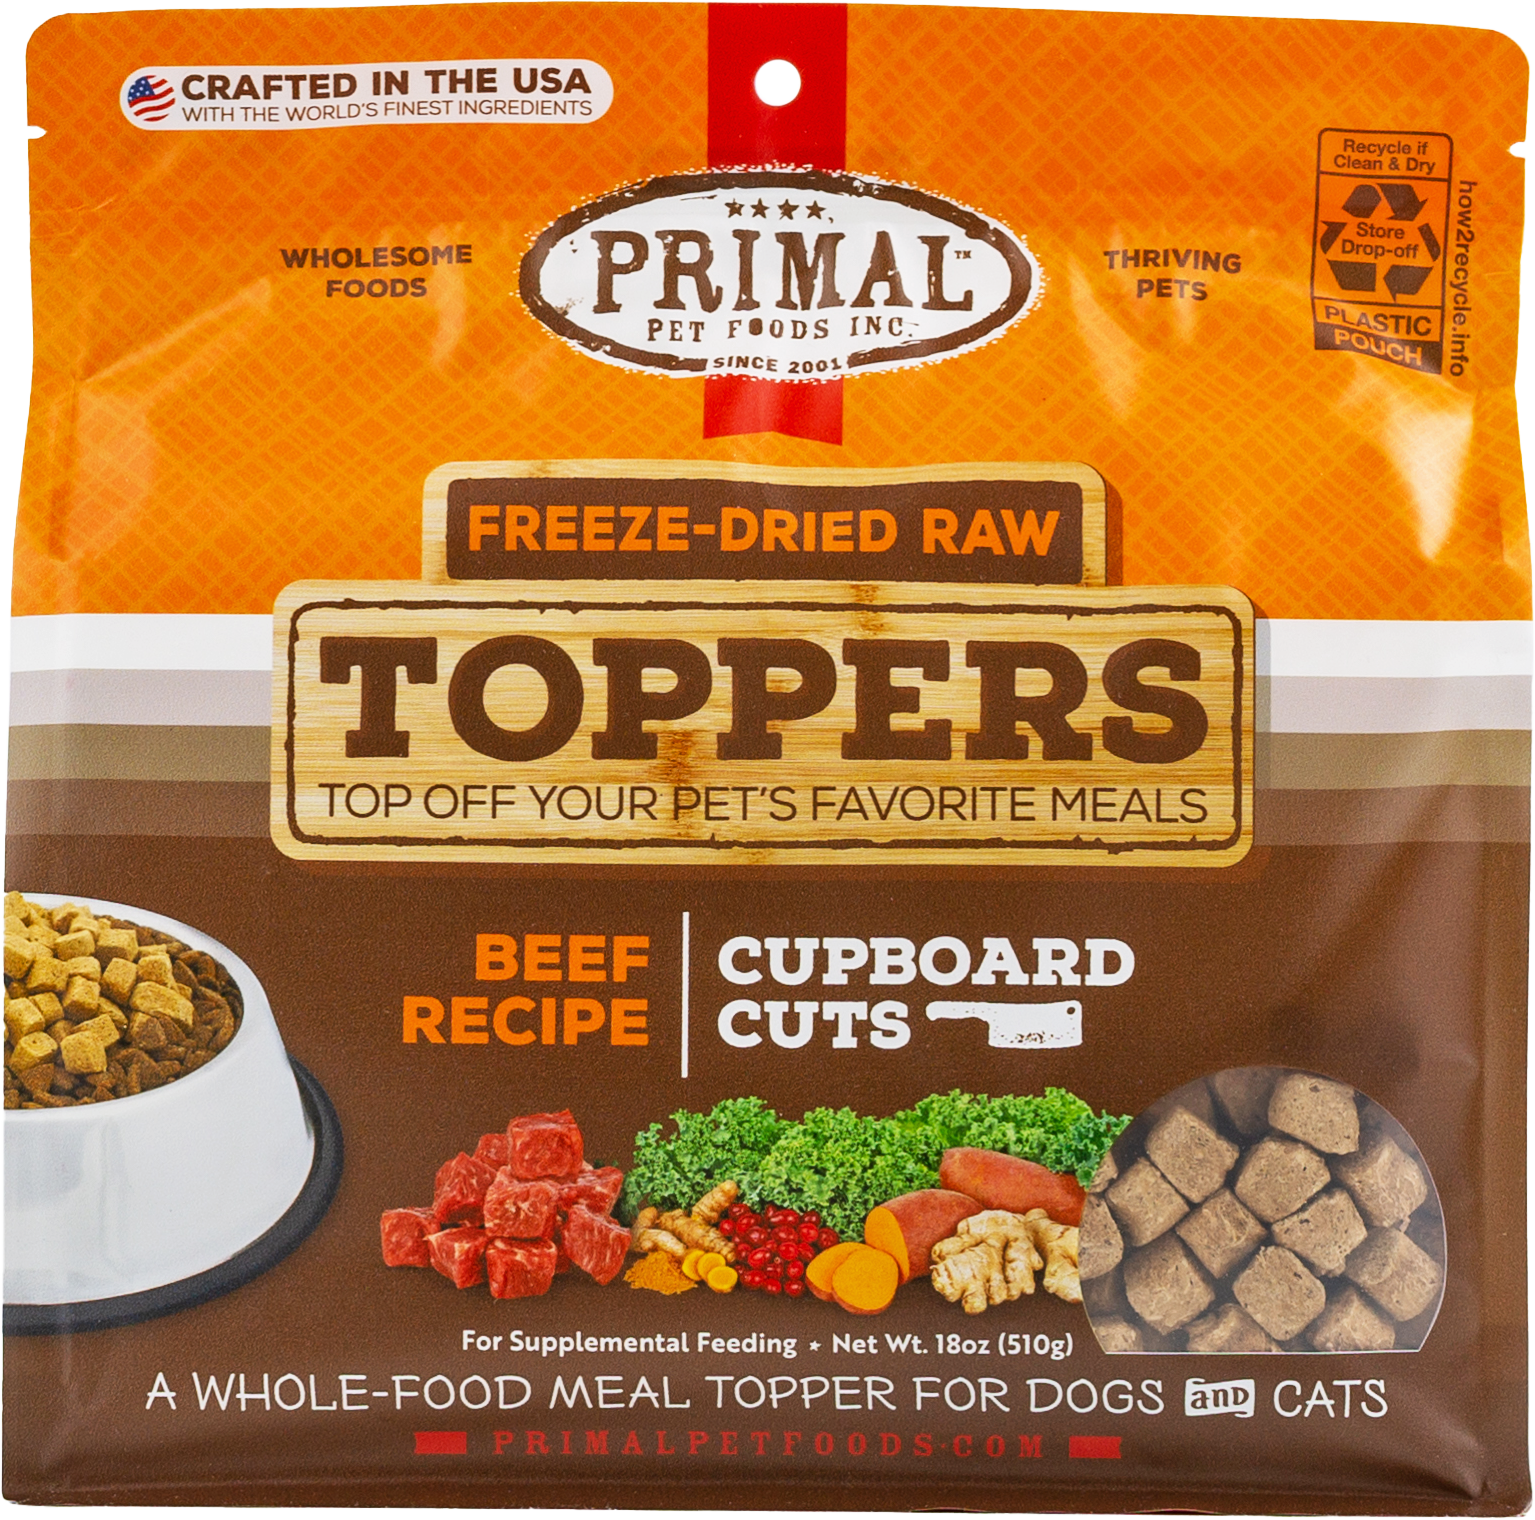 Primal Cupboard Cuts Freeze-Dried Raw Toppers - Beef, 18 oz